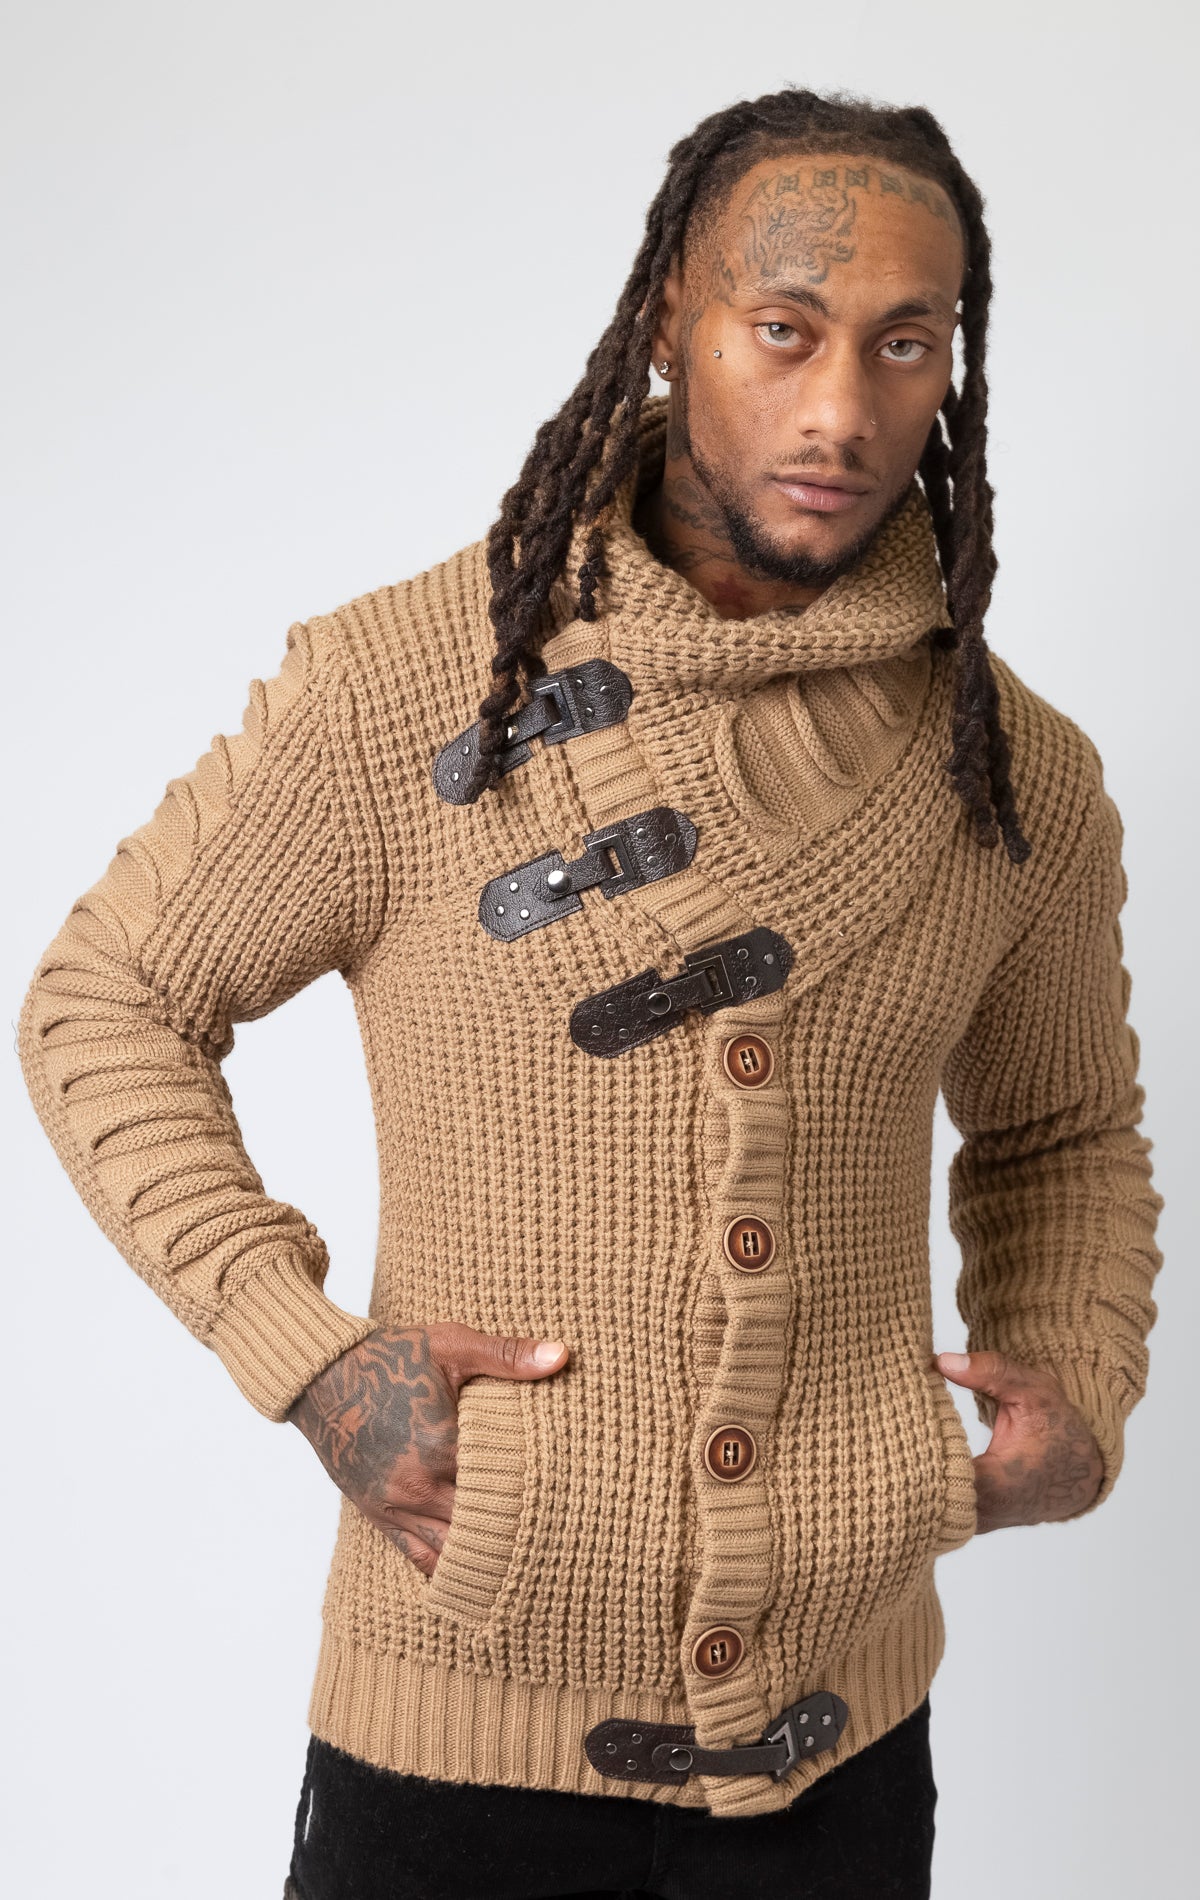 Model wearing brown versatile, high-quality sweater designed with heavy weight material to be worn in multiple ways